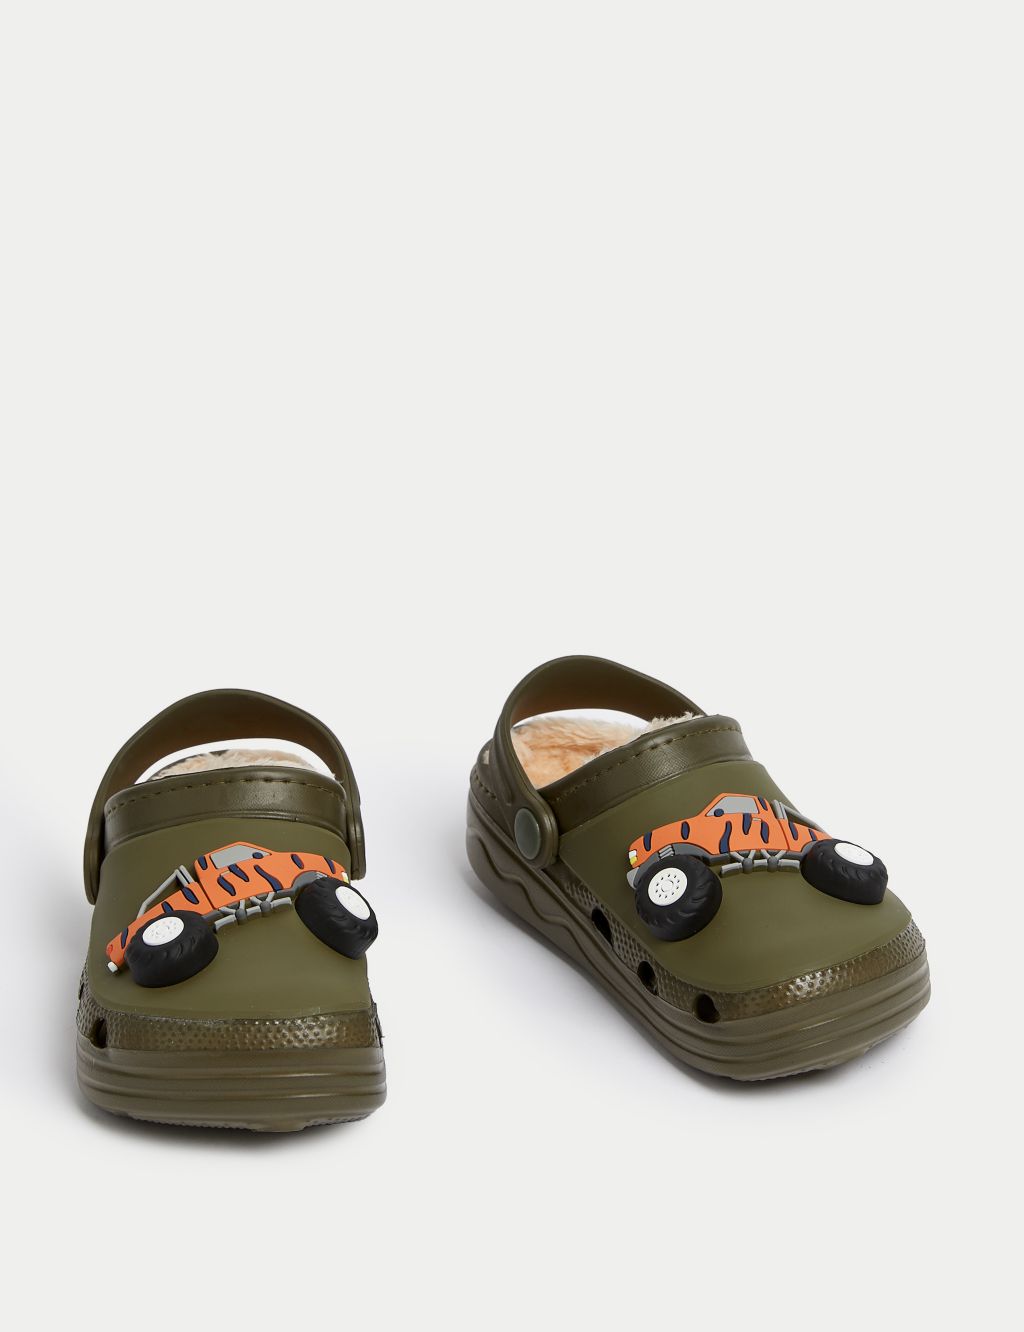 Kids' Monster Truck Clogs (4 Small - 13 Small) image 2